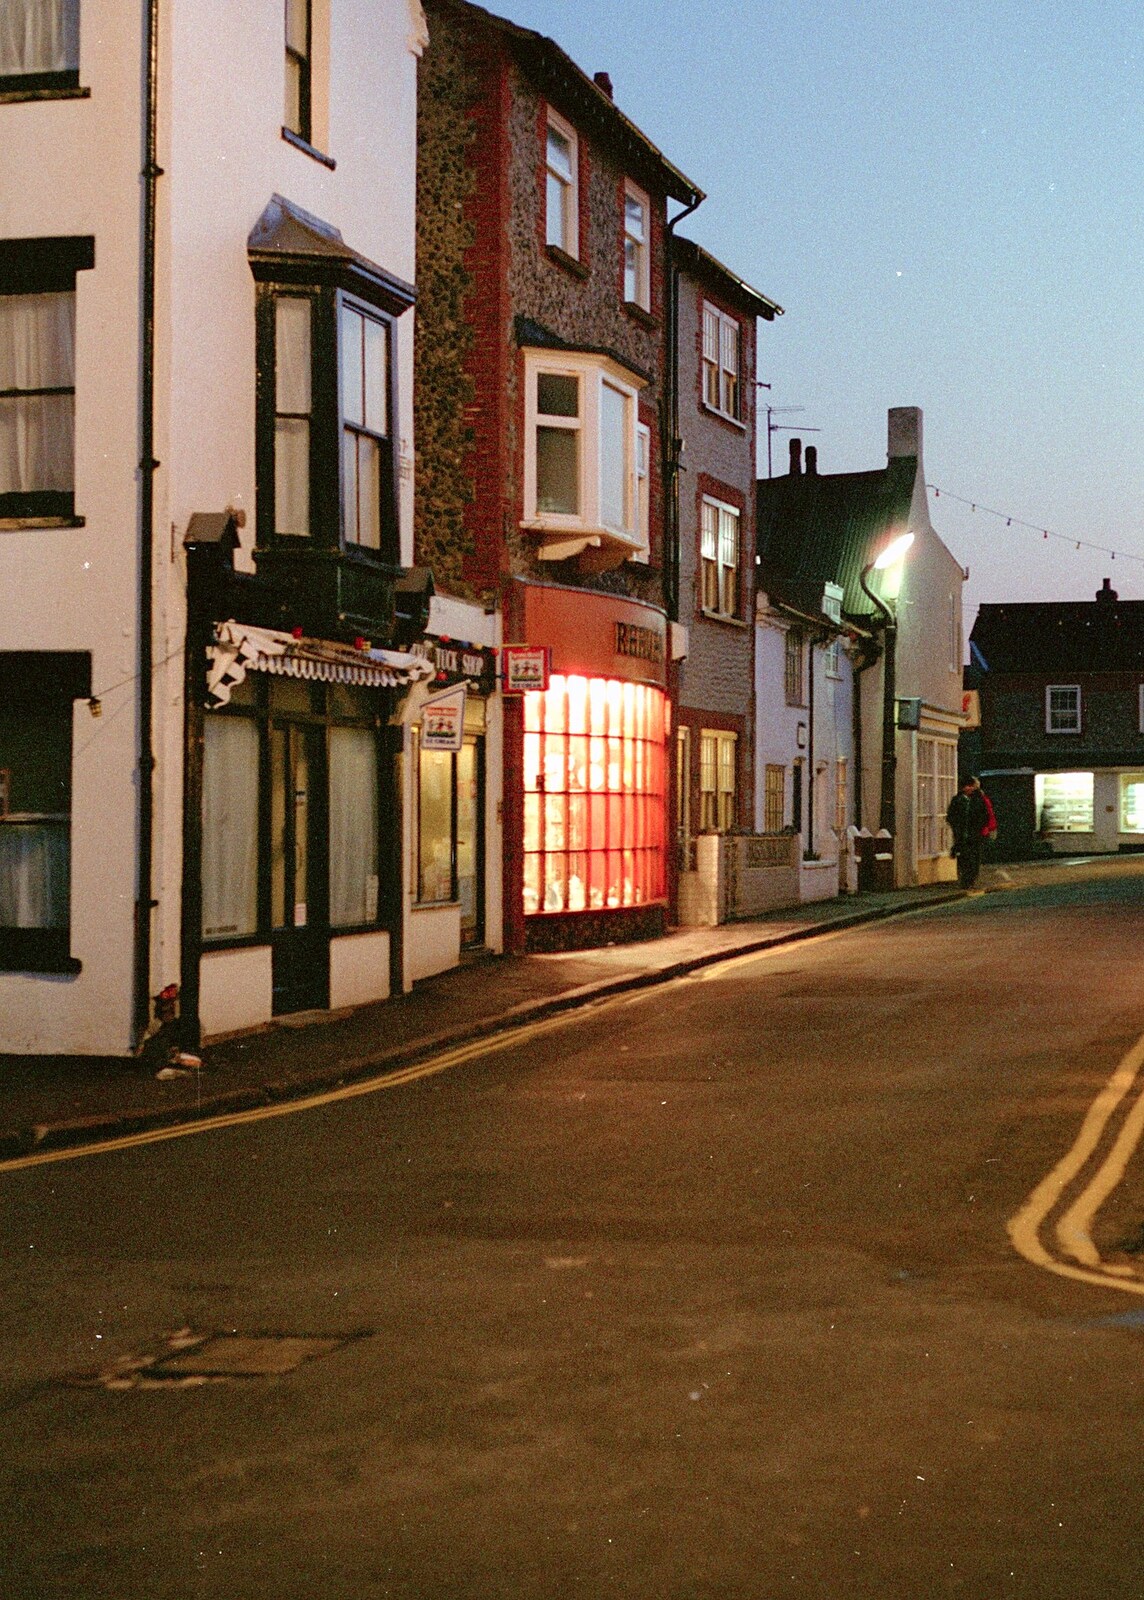 A Visit to Sheringham, North Norfolk - 20th November 1987: A warm glow spills out from a shop front